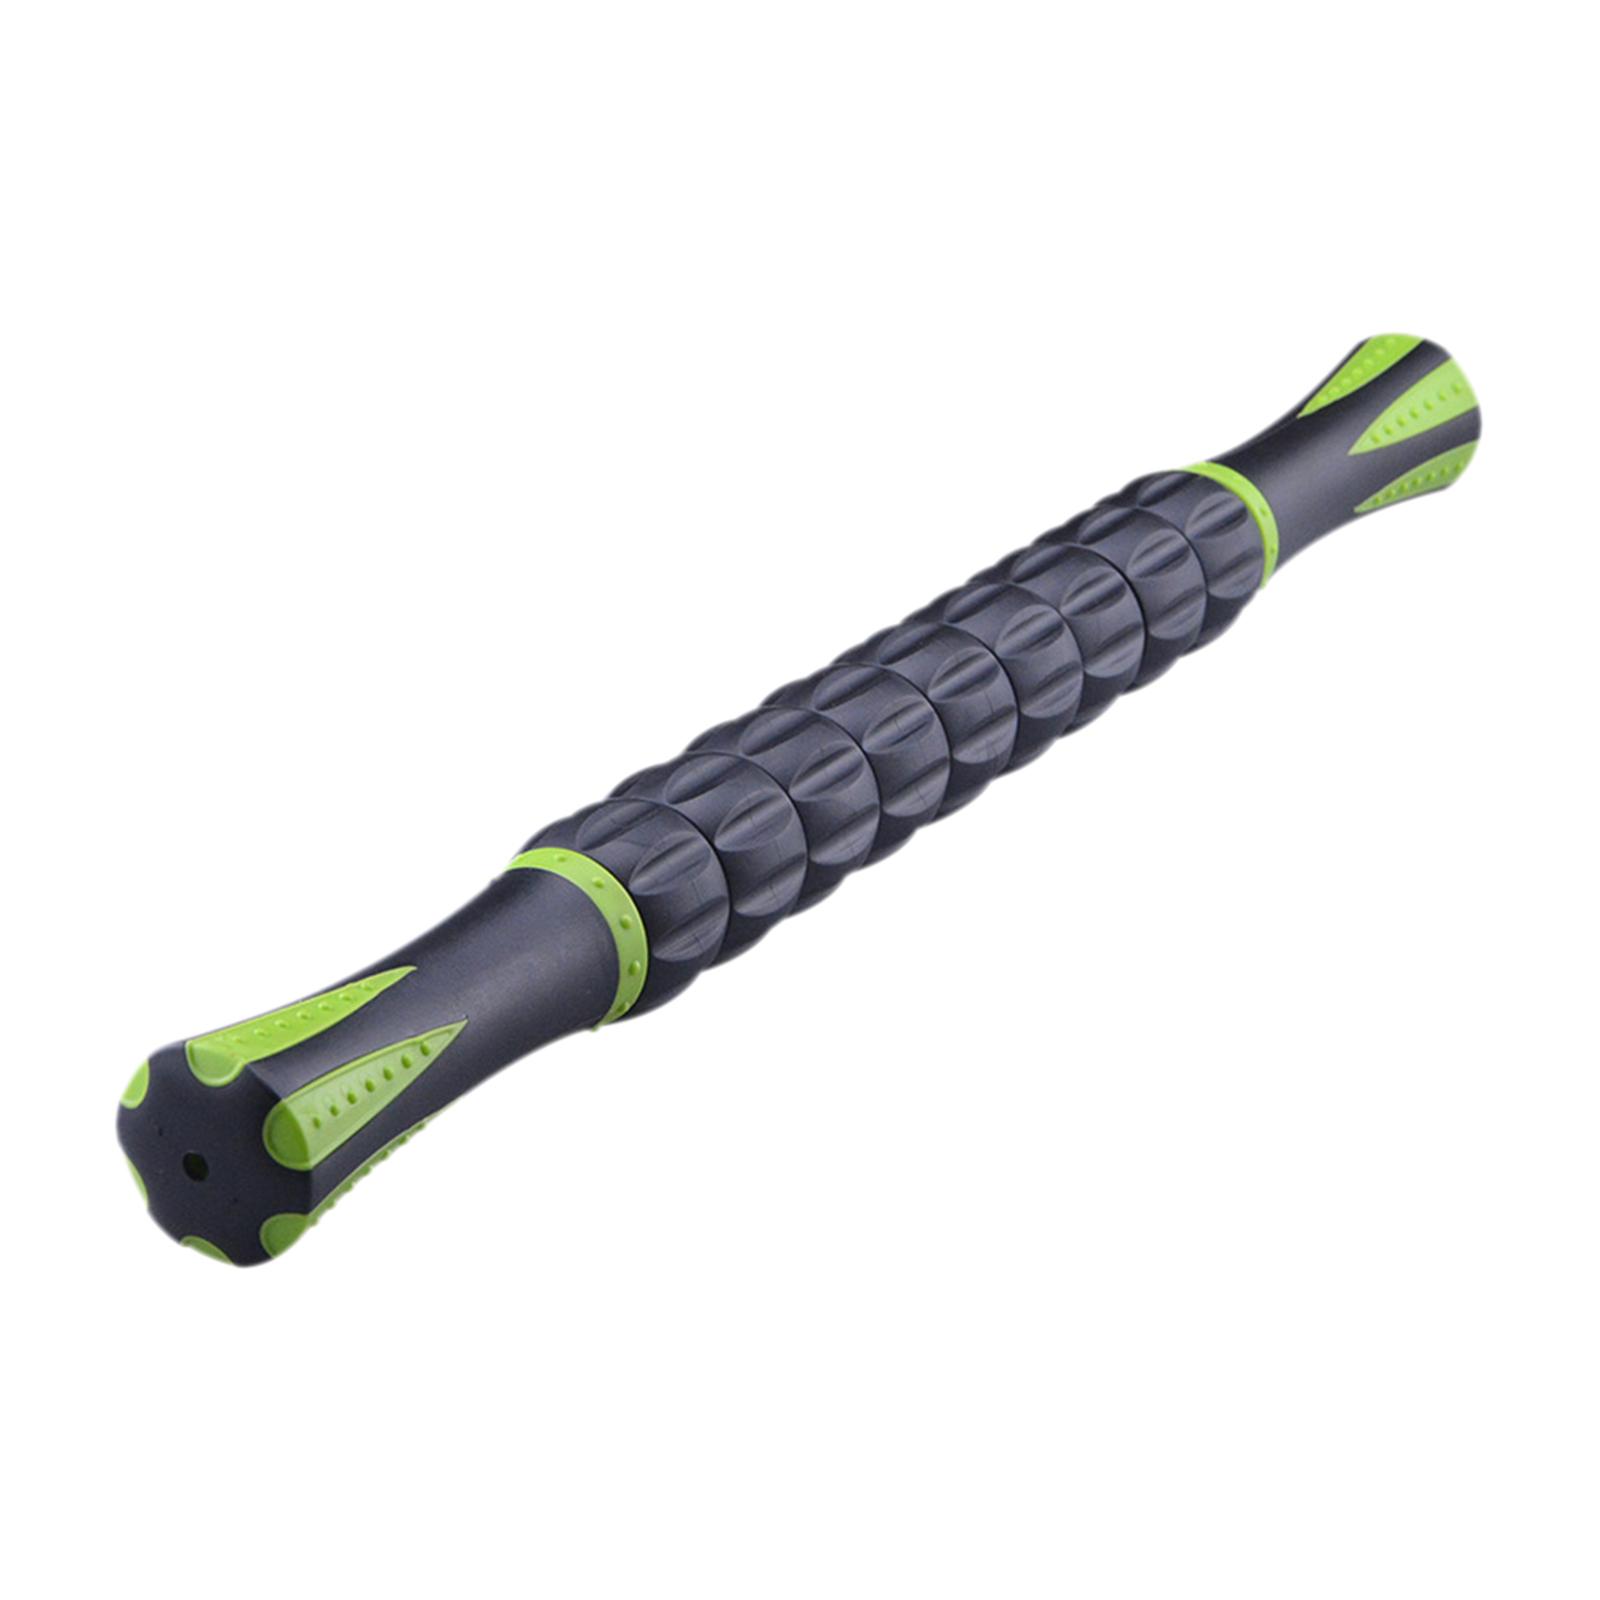 Muscle Roller Massage Stick for Athletes 17" Body Massager Black Green